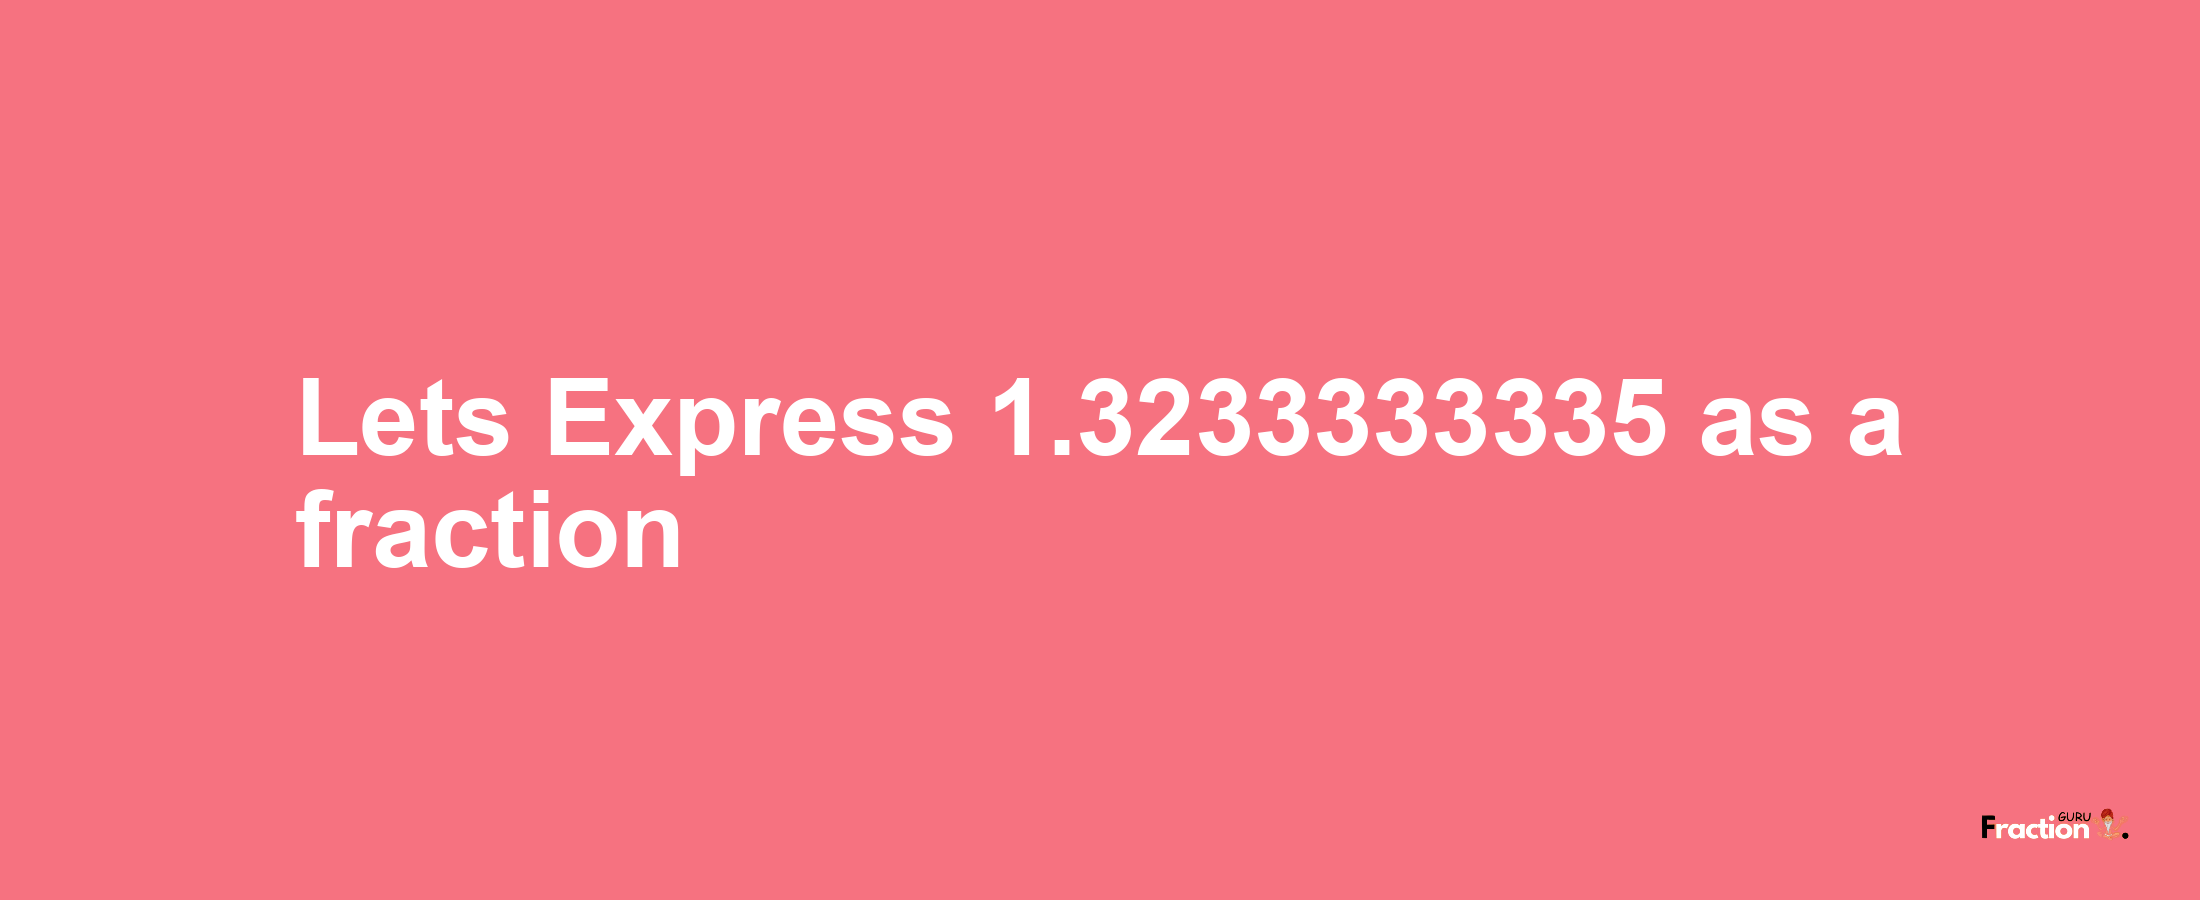 Lets Express 1.3233333335 as afraction